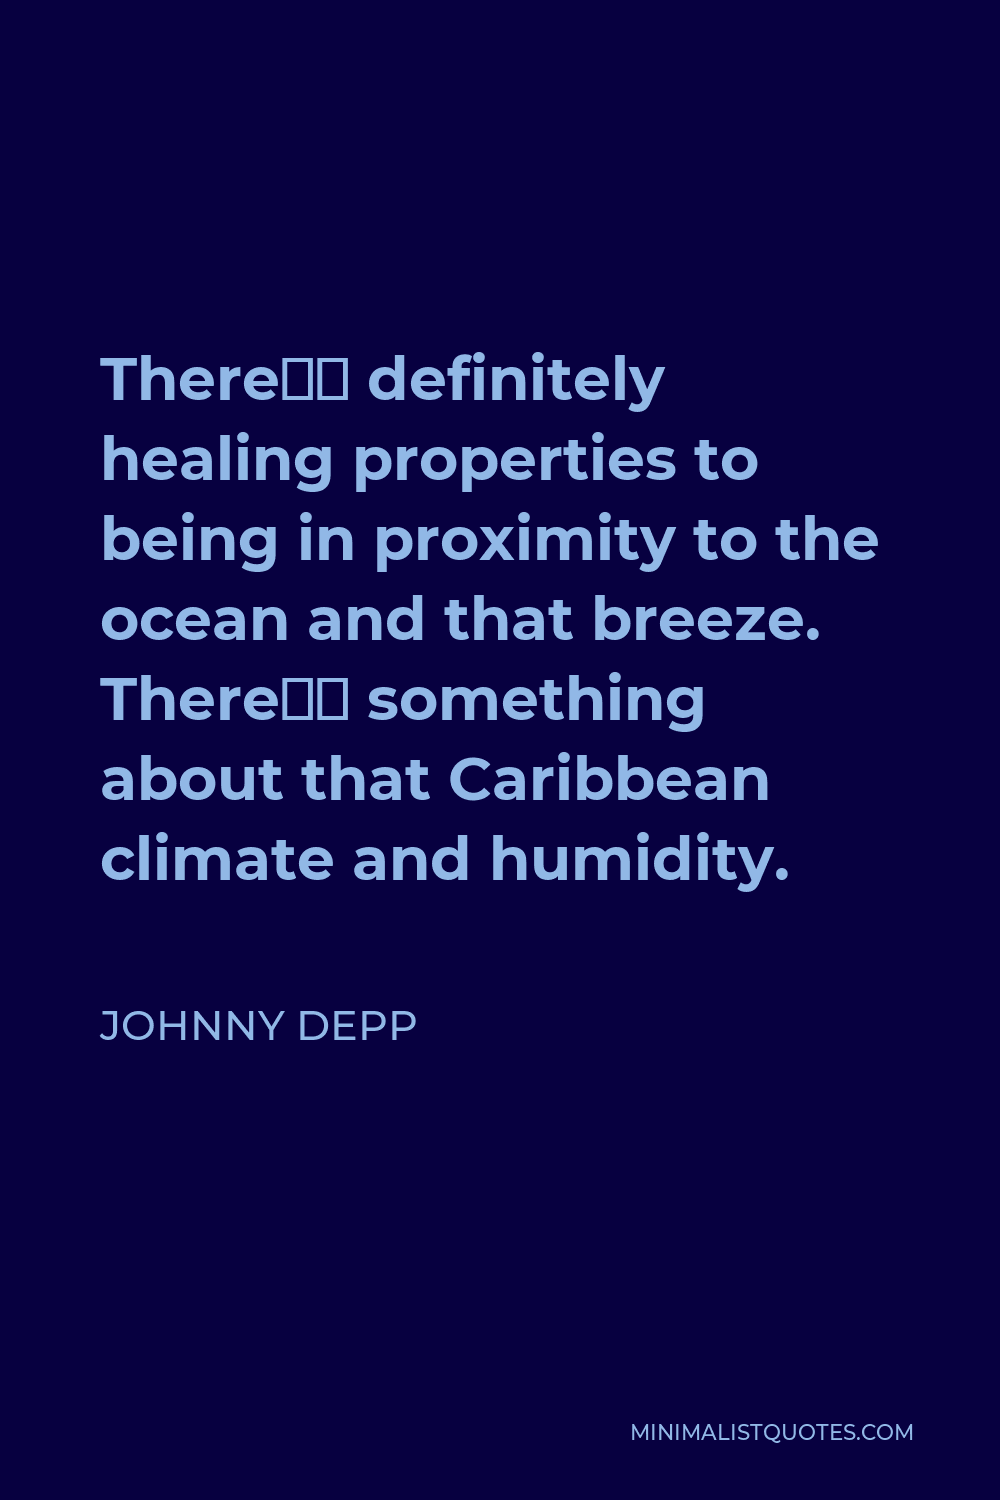 Johnny Depp Quote - There’s definitely healing properties to being in proximity to the ocean and that breeze. There’s something about that Caribbean climate and humidity.